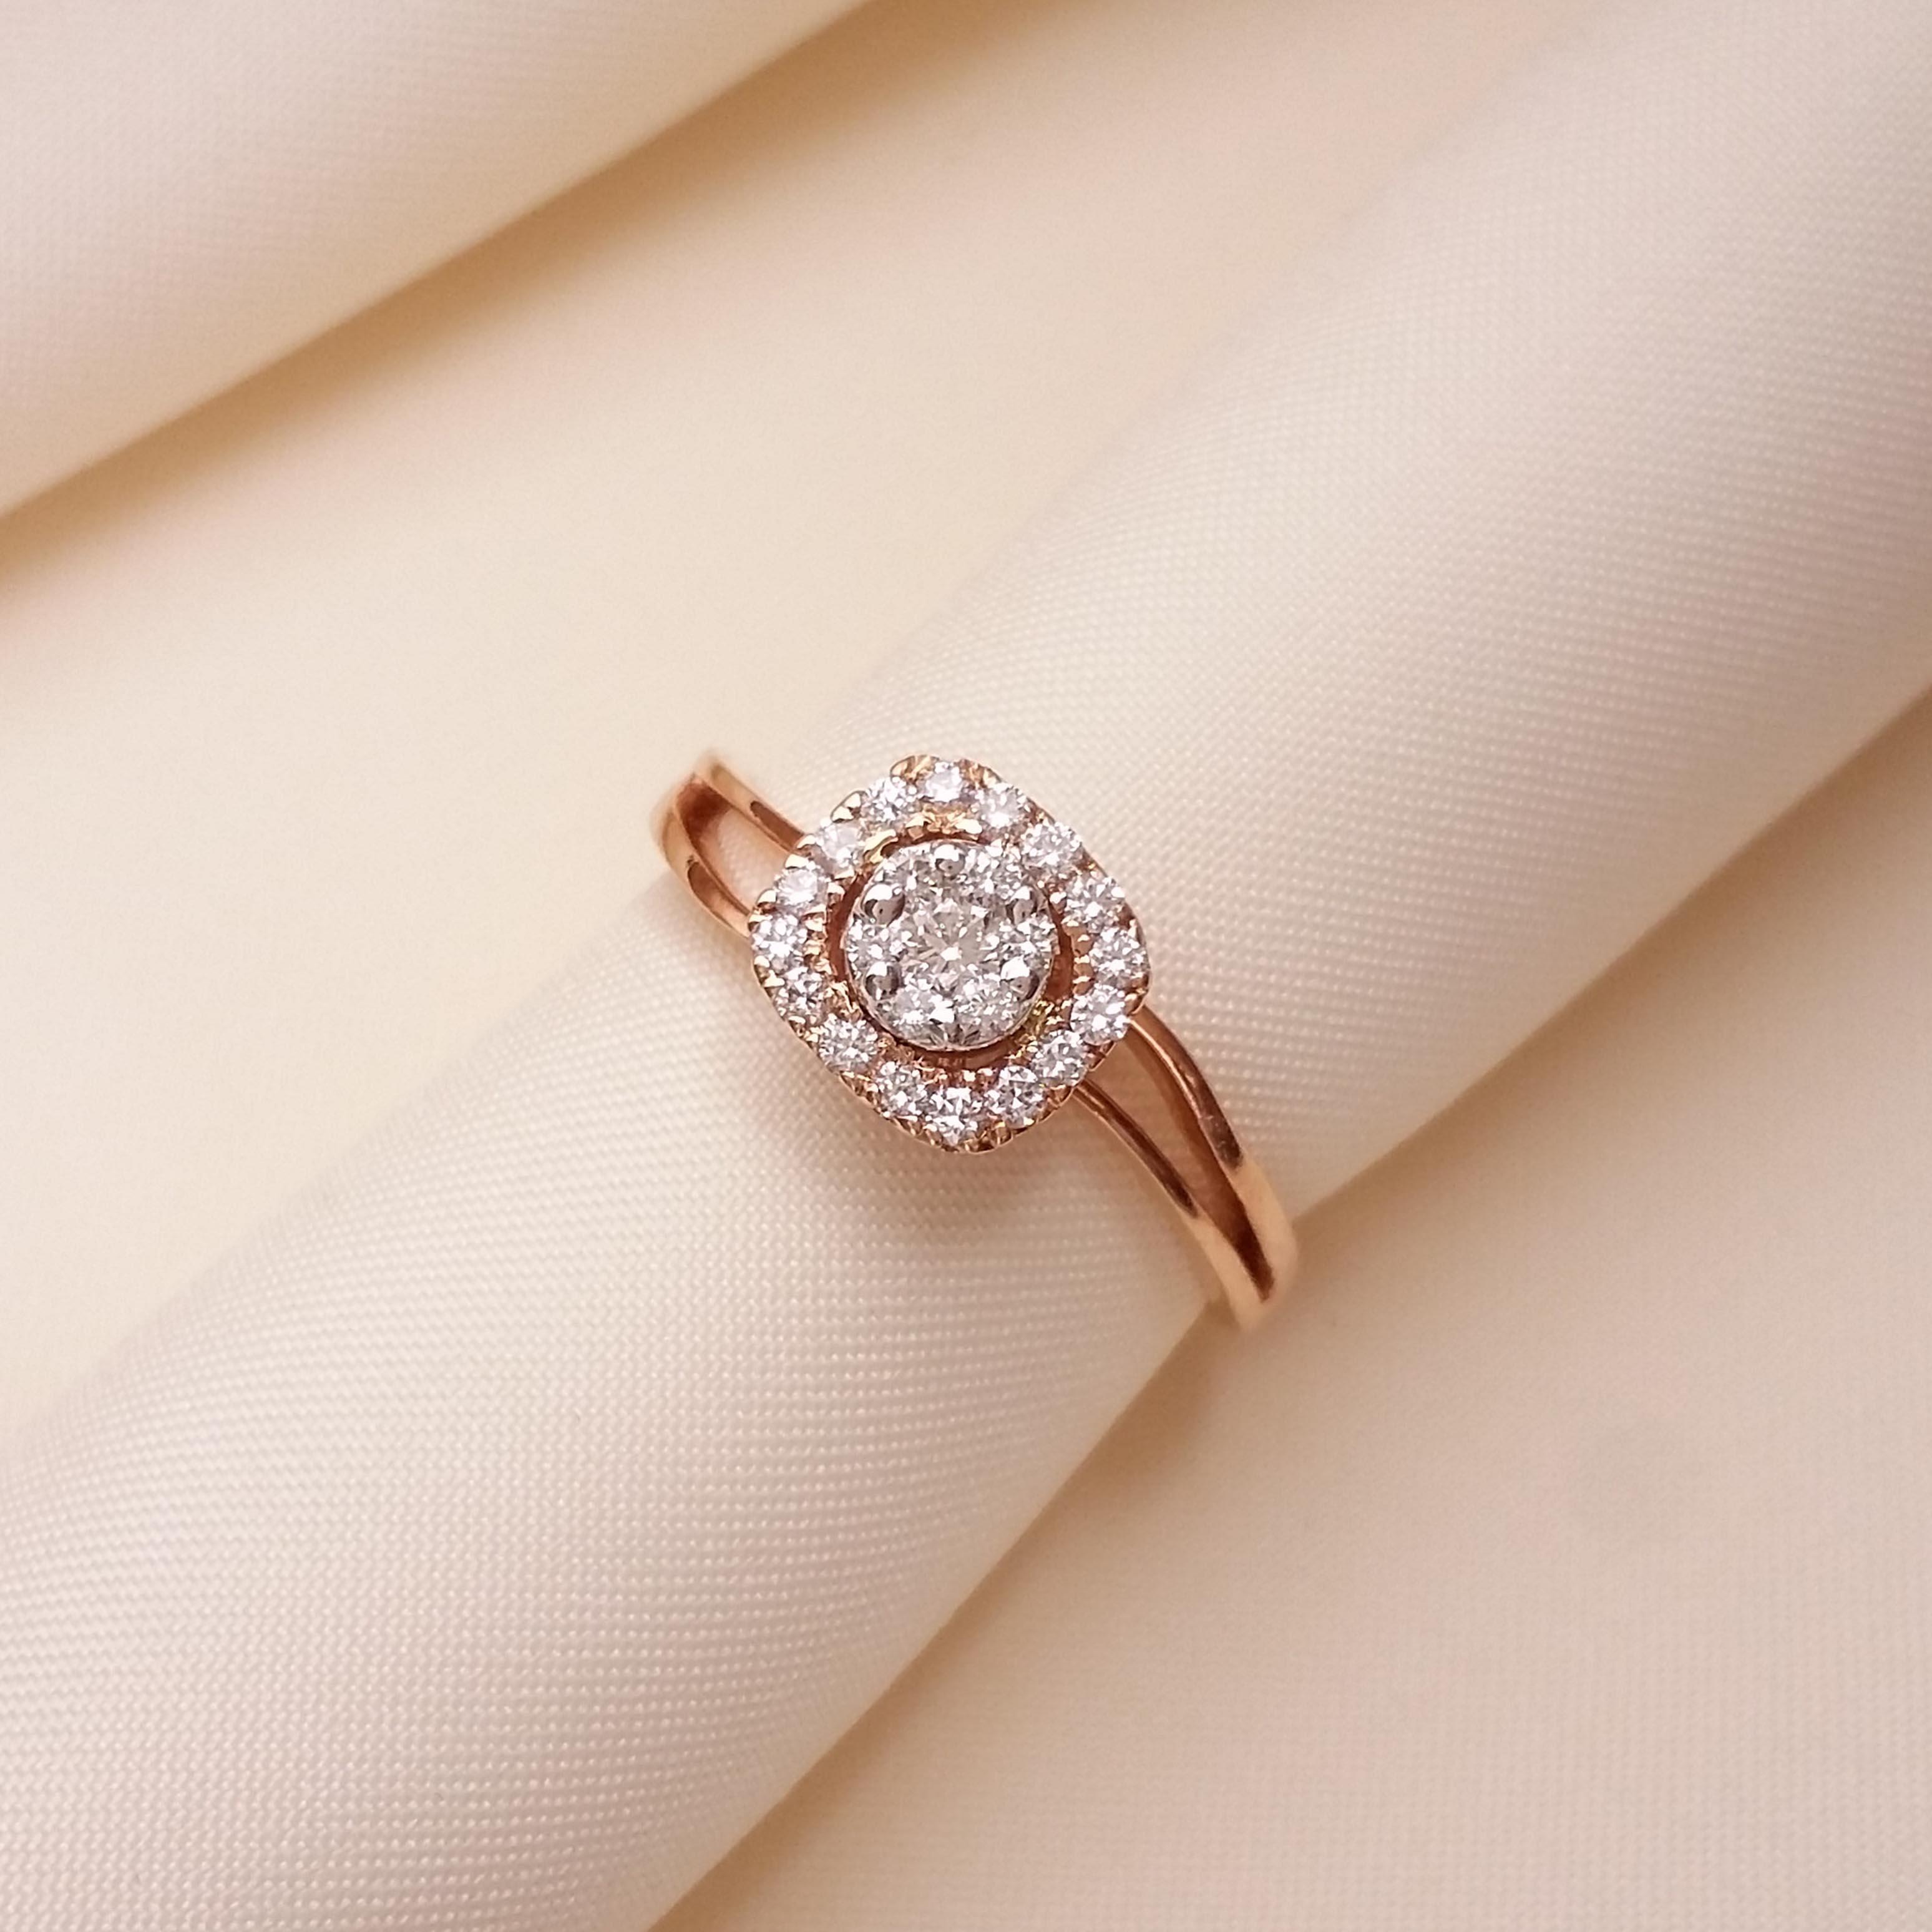 Purchase the High-Quality Yellow Gold Wedding Rings | GLAMIRA.com